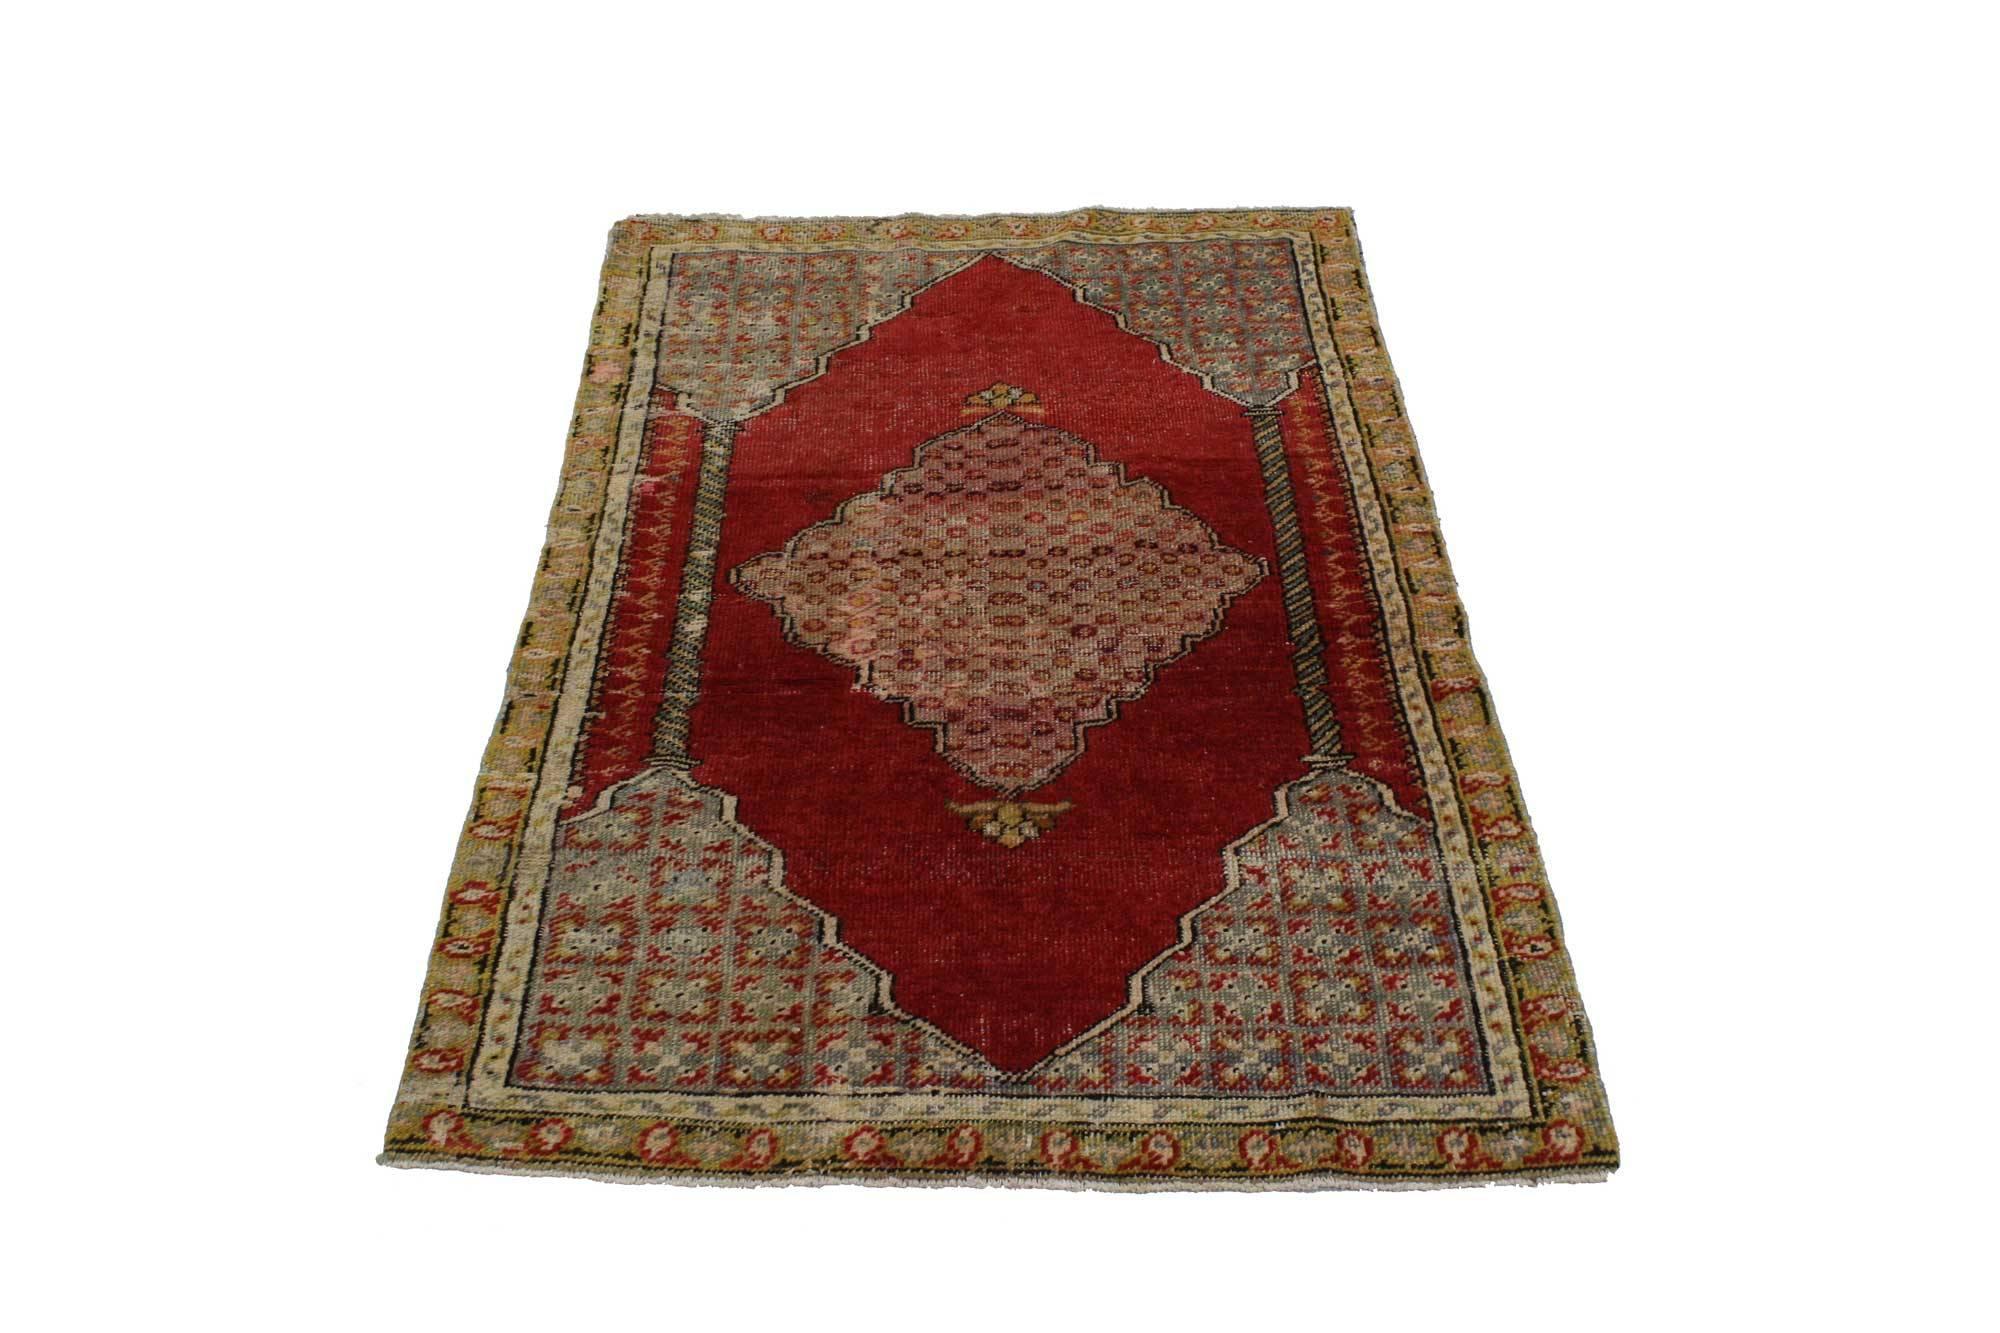 51736, vintage Turkish Oushak Accent rug, entry or foyer rug. This vintage Turkish Oushak rug features a modern traditional style. Immersed in Anatolian history and refined colors, this vintage Oushak rug combines simplicity with sophistication.